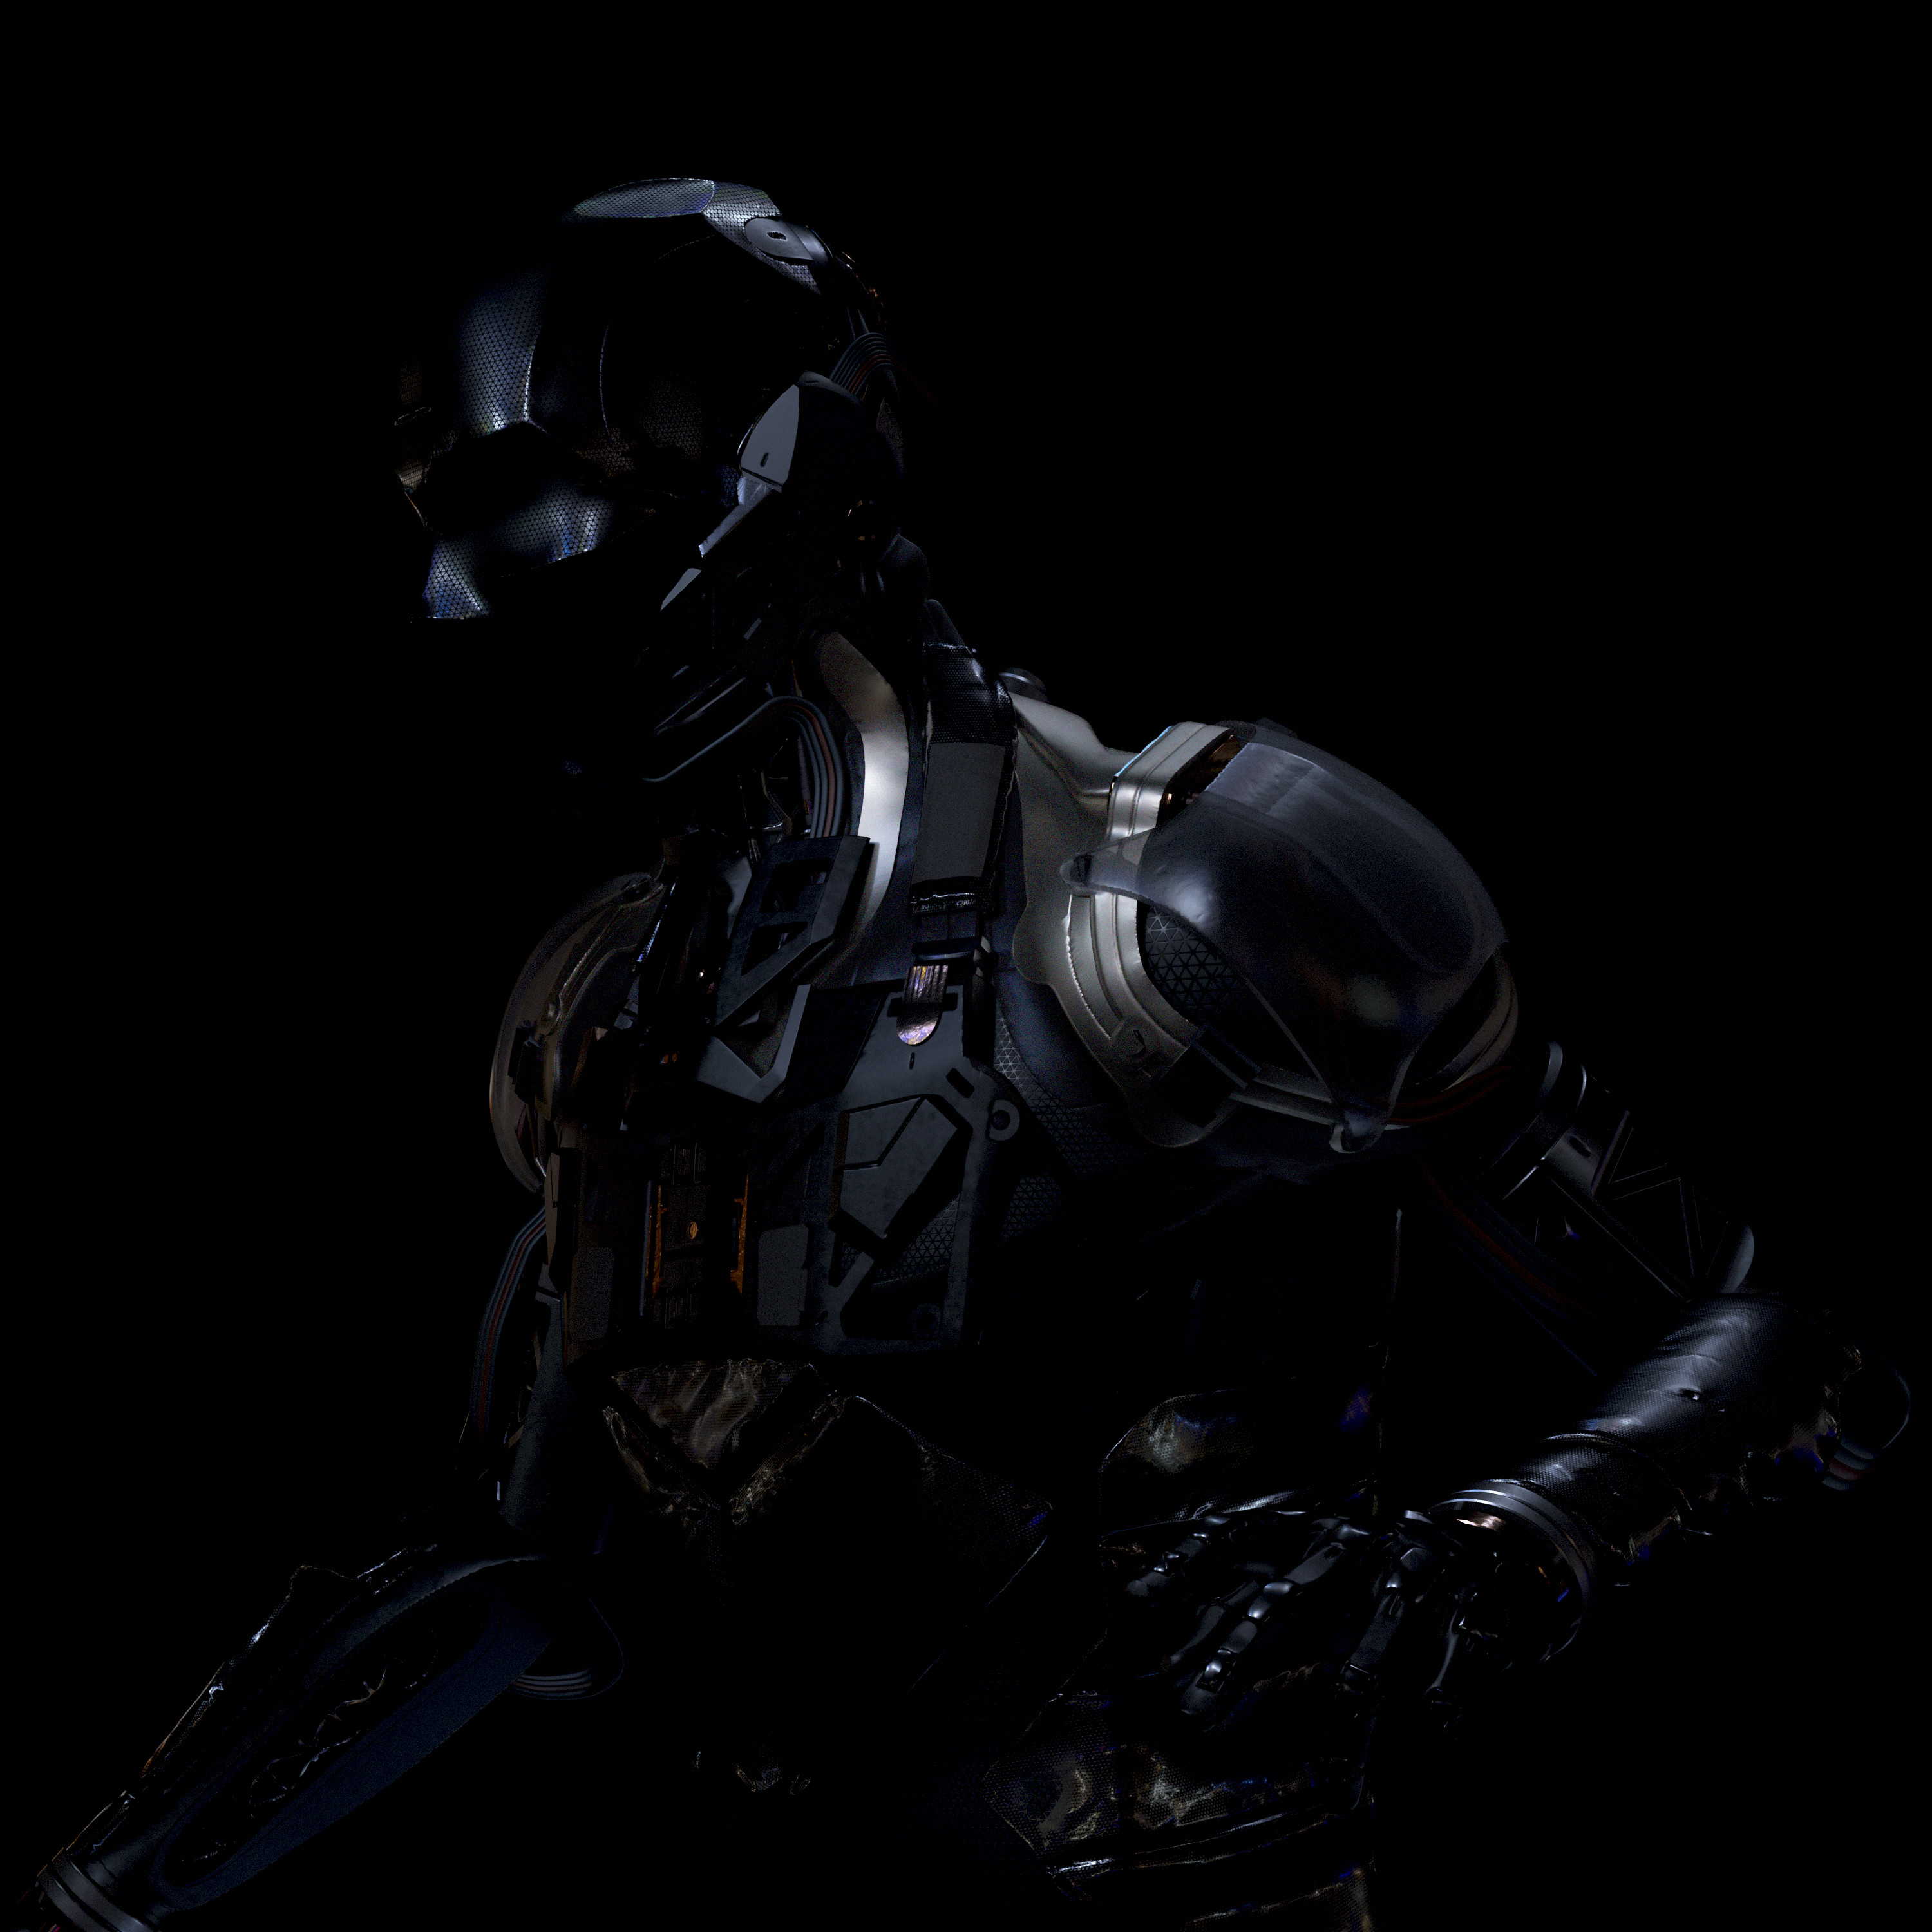 Accidental dark render that I liked the look of.